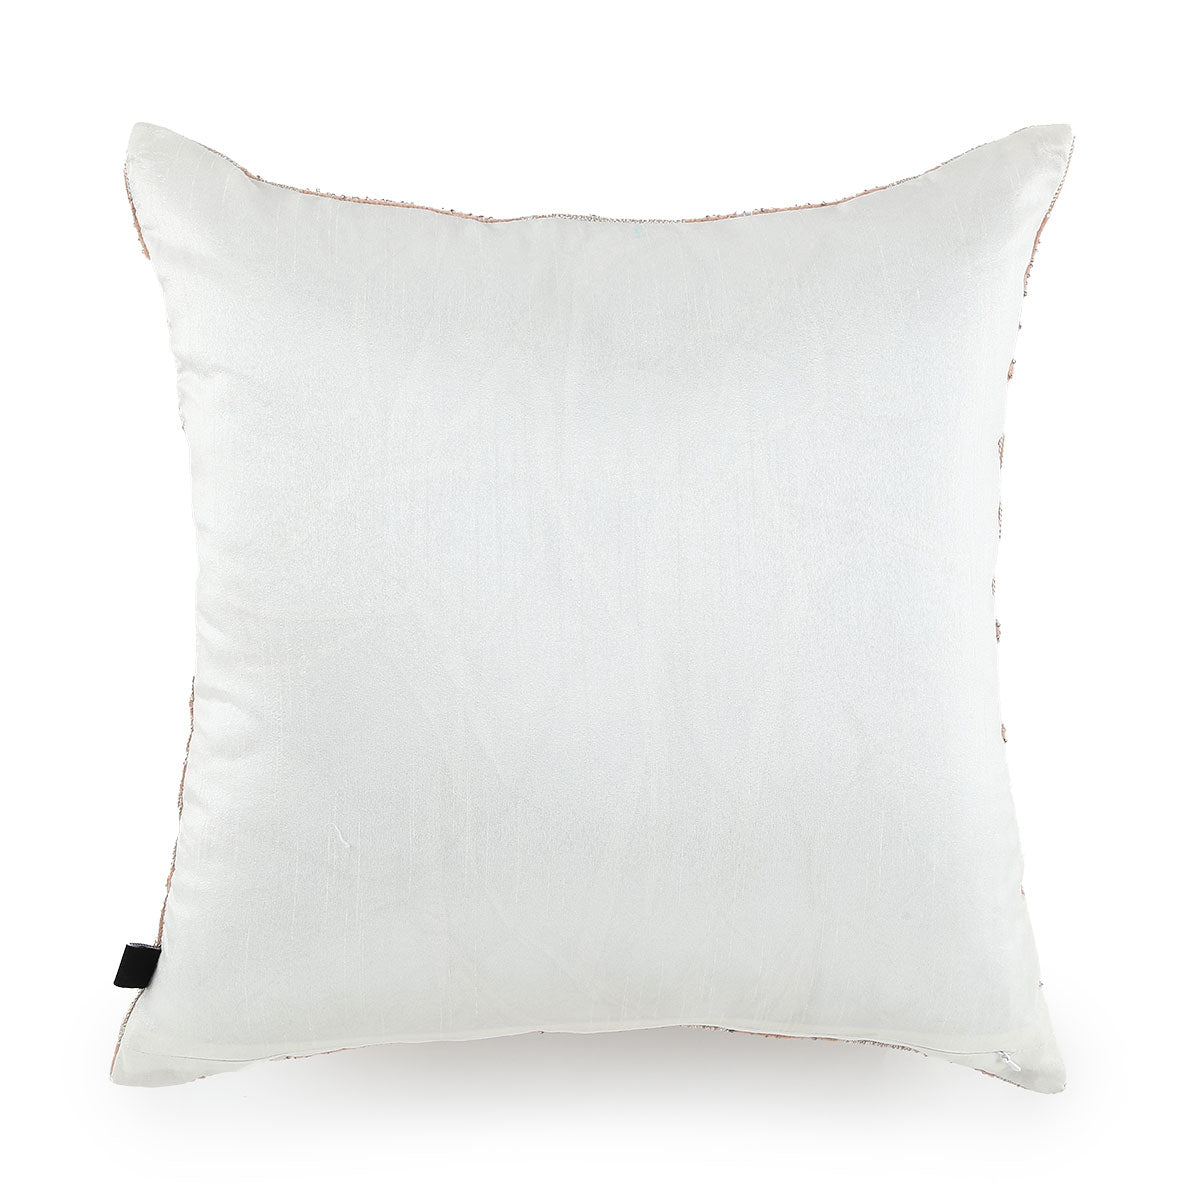 Pied Embroidery Cushion Cover 18 x 18 Inch